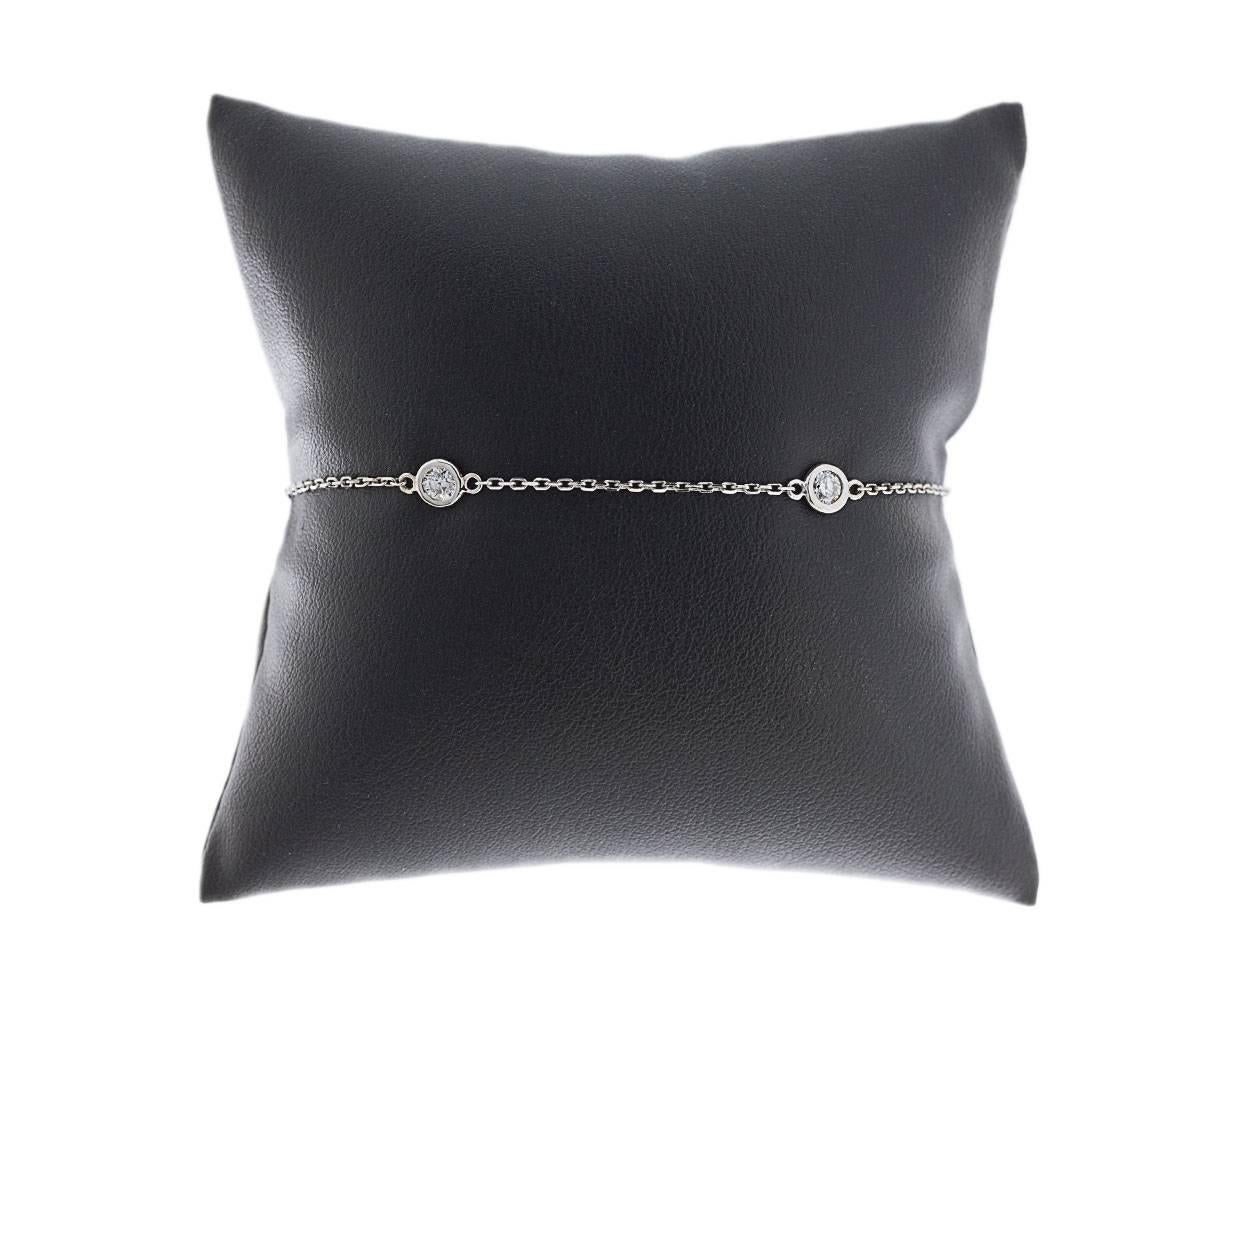 This beautiful diamond bracelet features a classic 